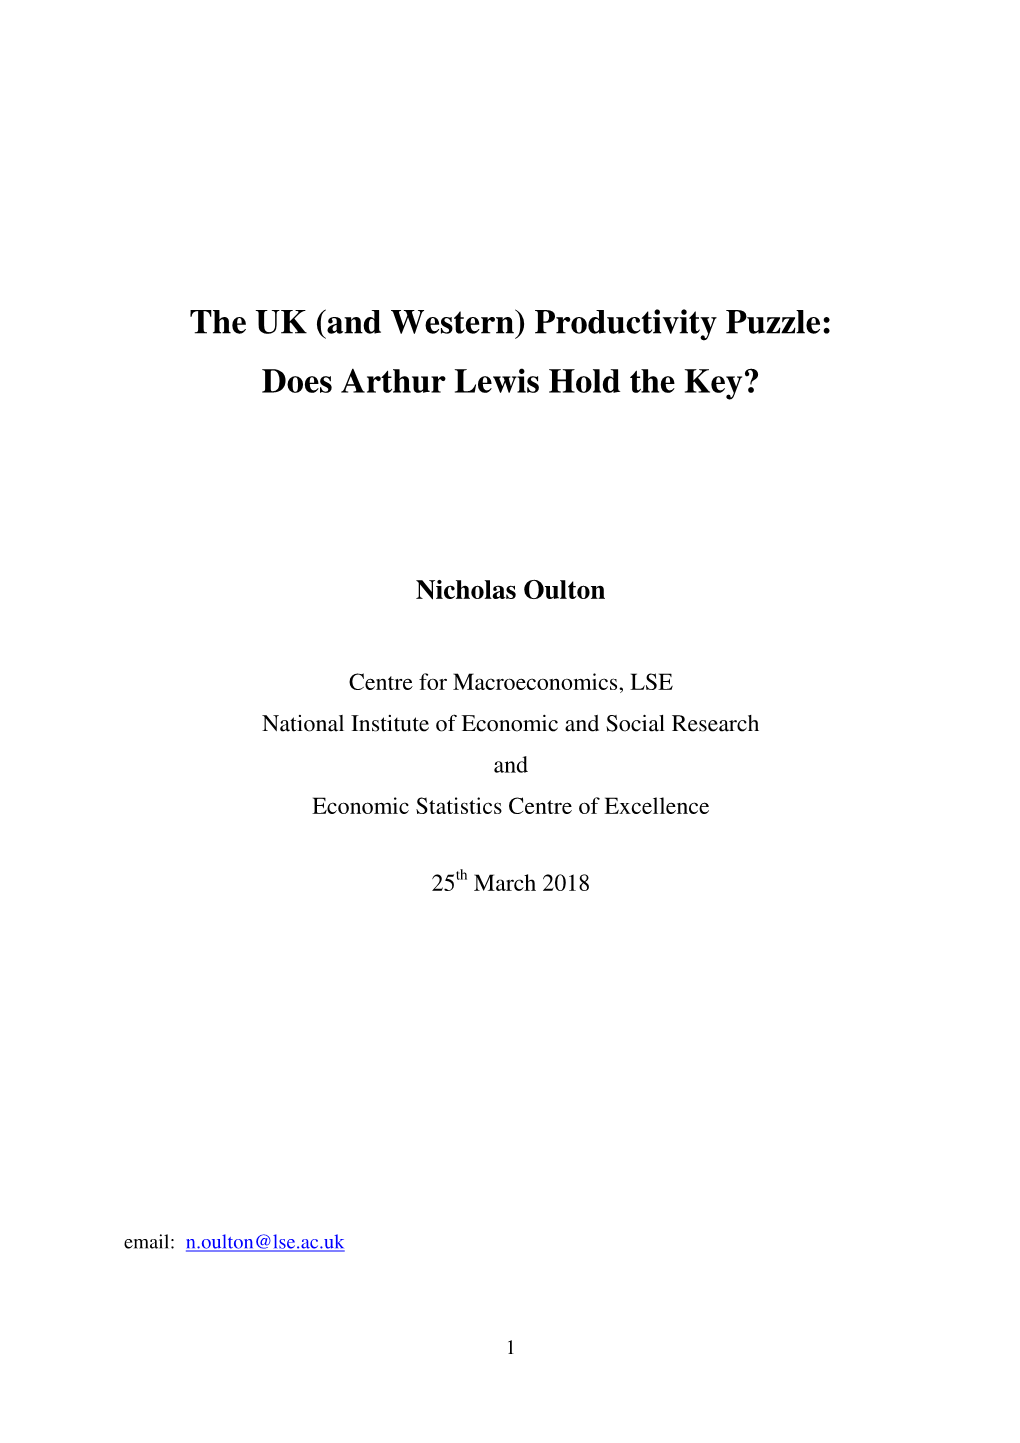 The UK (And Western) Productivity Puzzle: Does Arthur Lewis Hold the Key?